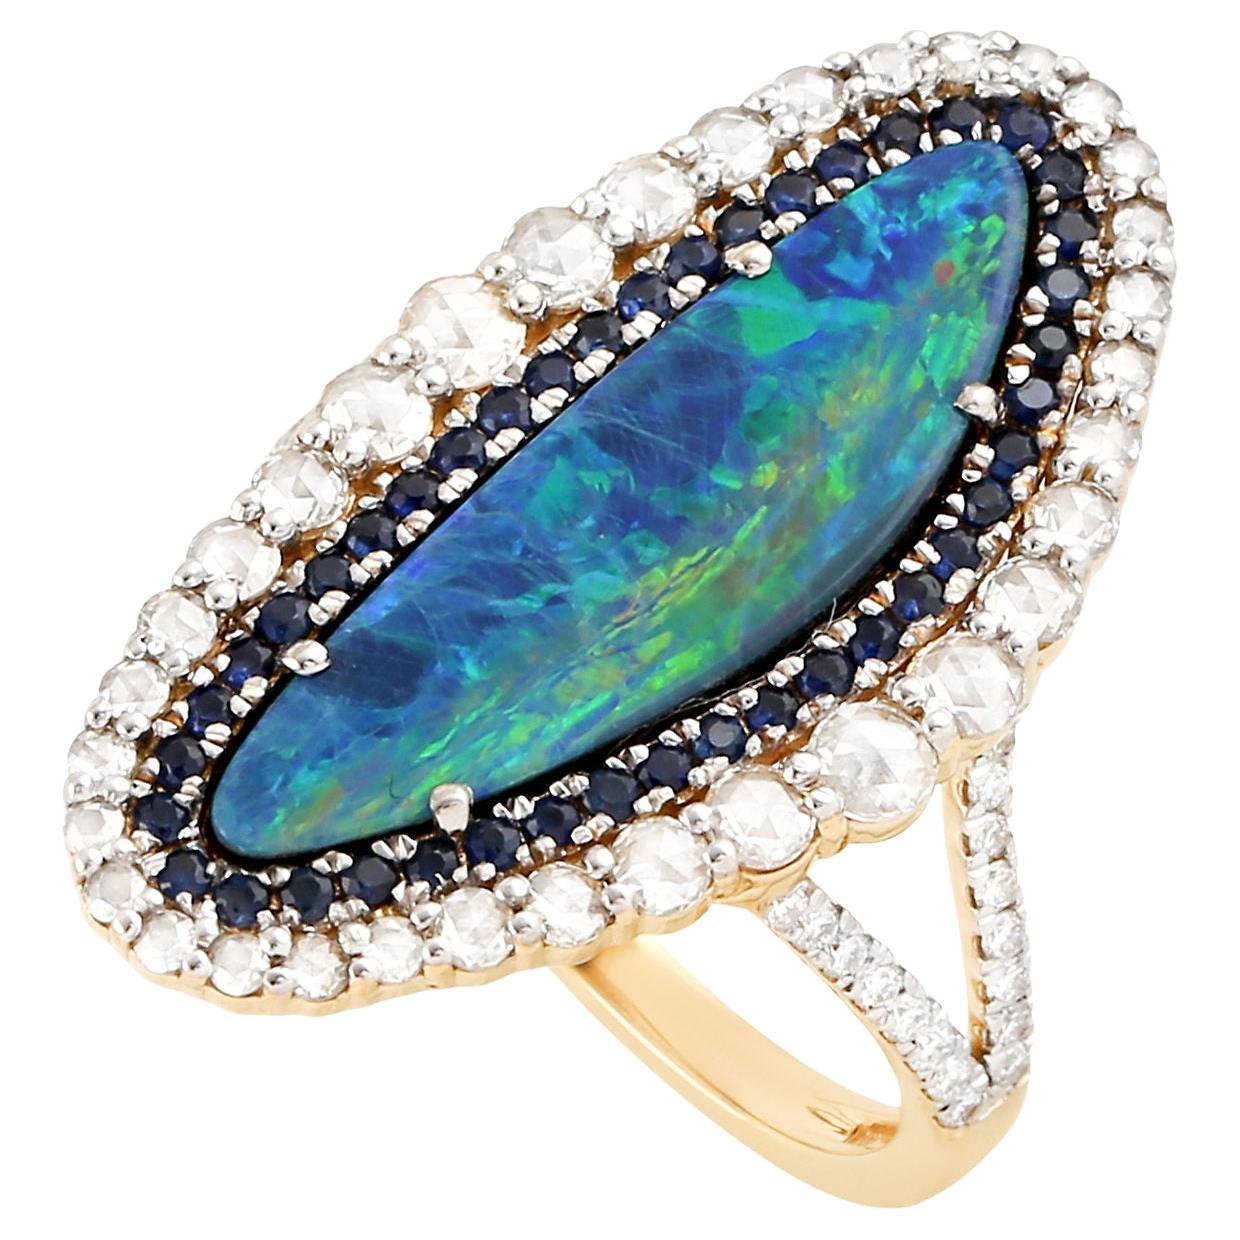 Black Opal Cocktail Ring Blue Sapphires Diamonds 2.8 Carats 18K Yellow Gold